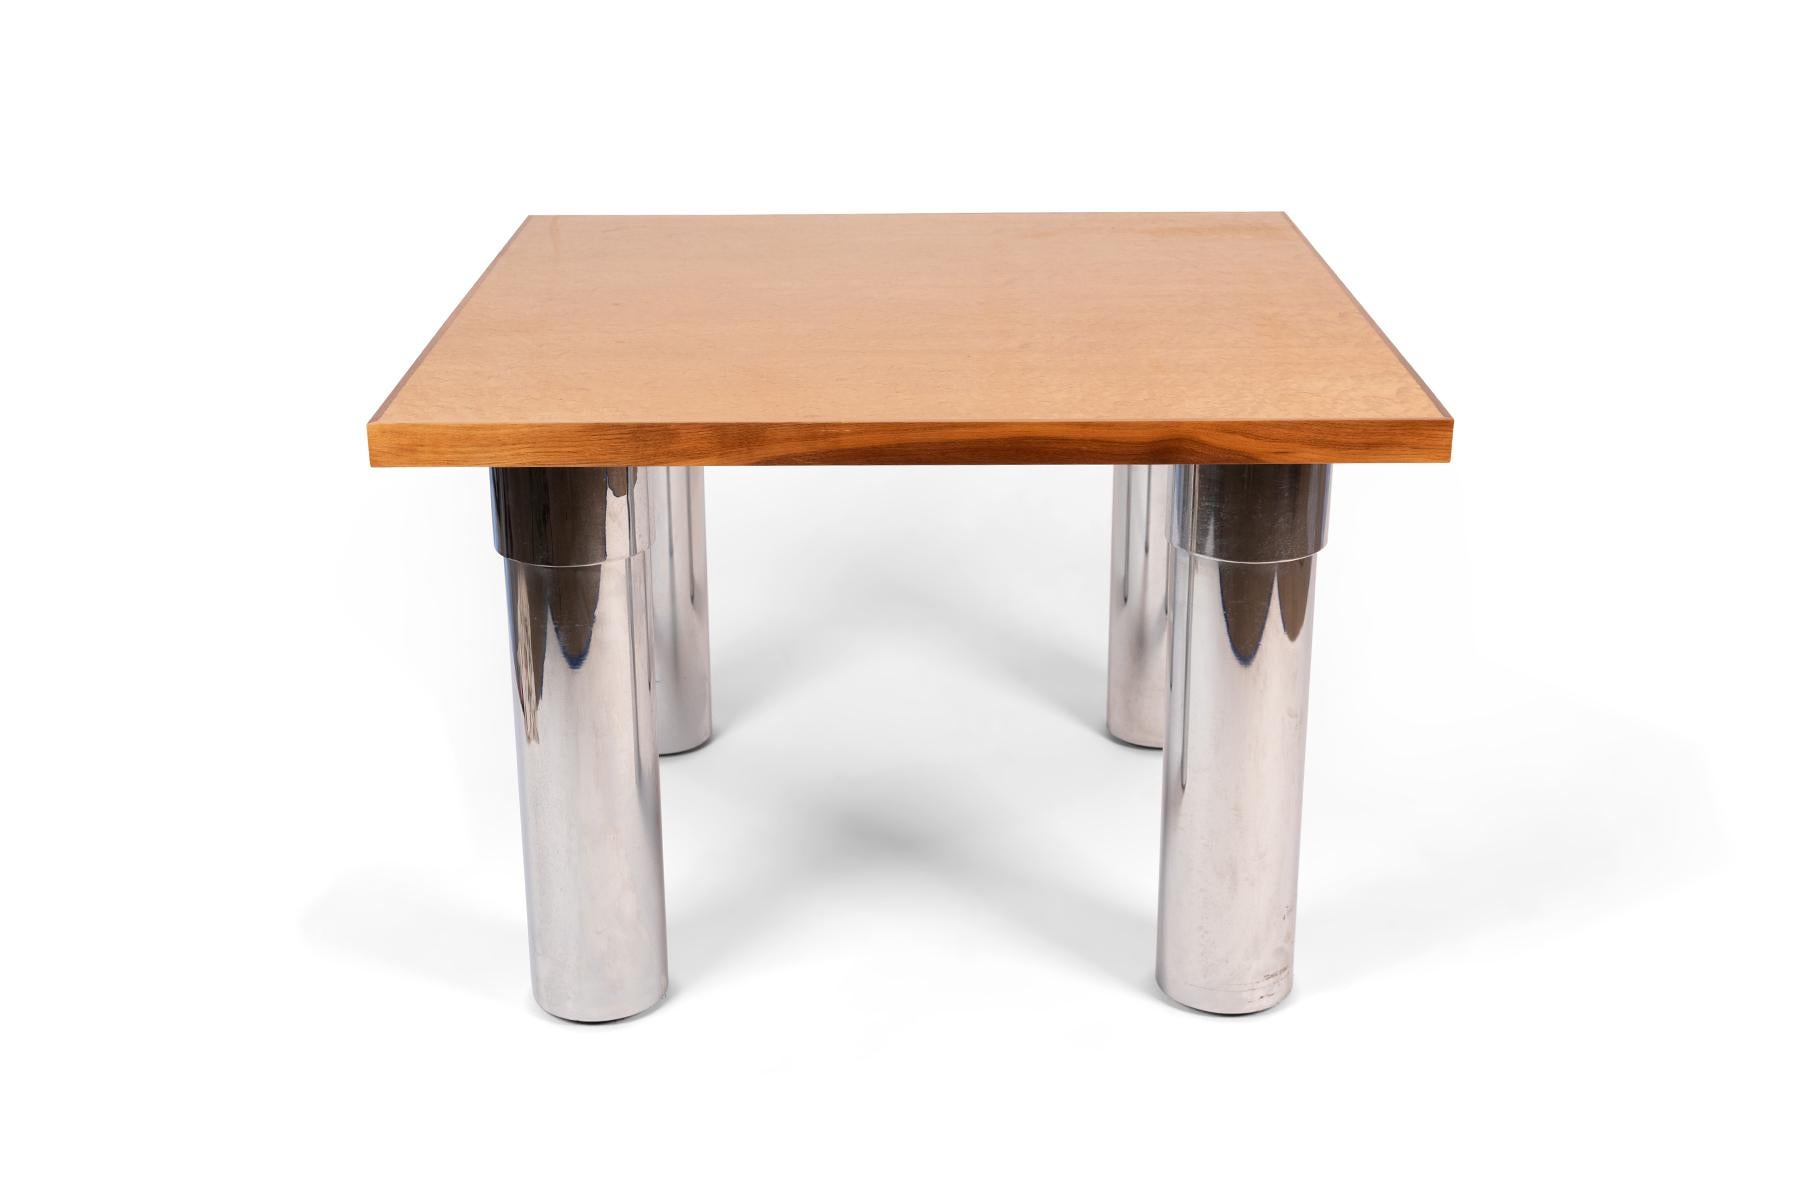 Pace maple burl wood and chrome dining table, circa 1970s featuring stylized tubular chrome finished steel legs.